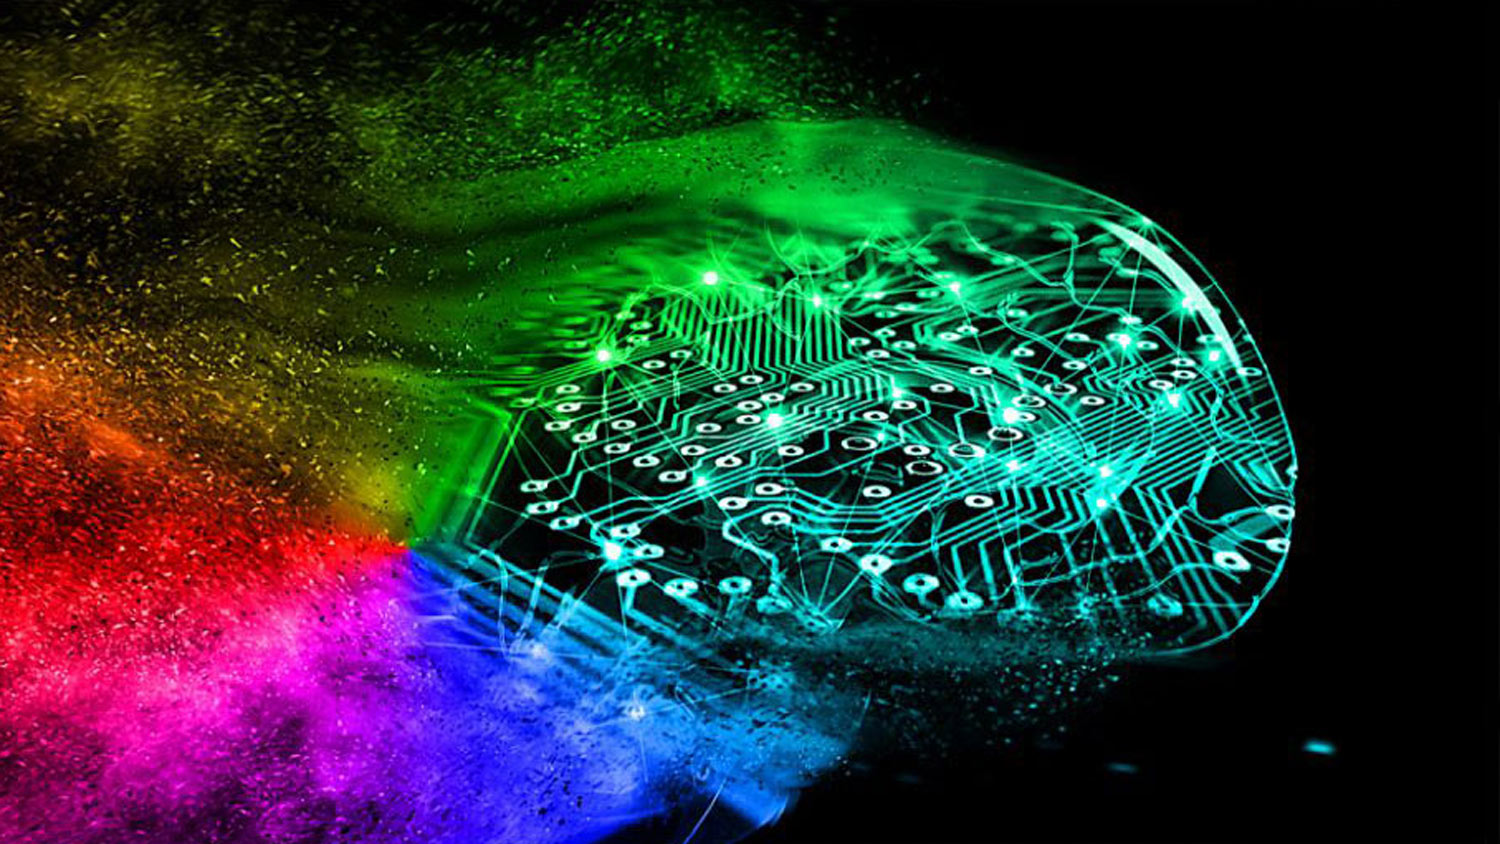 A color burst of red, pink, blue, and green, merging into a network of dots and lines that mimic a circuitboard.